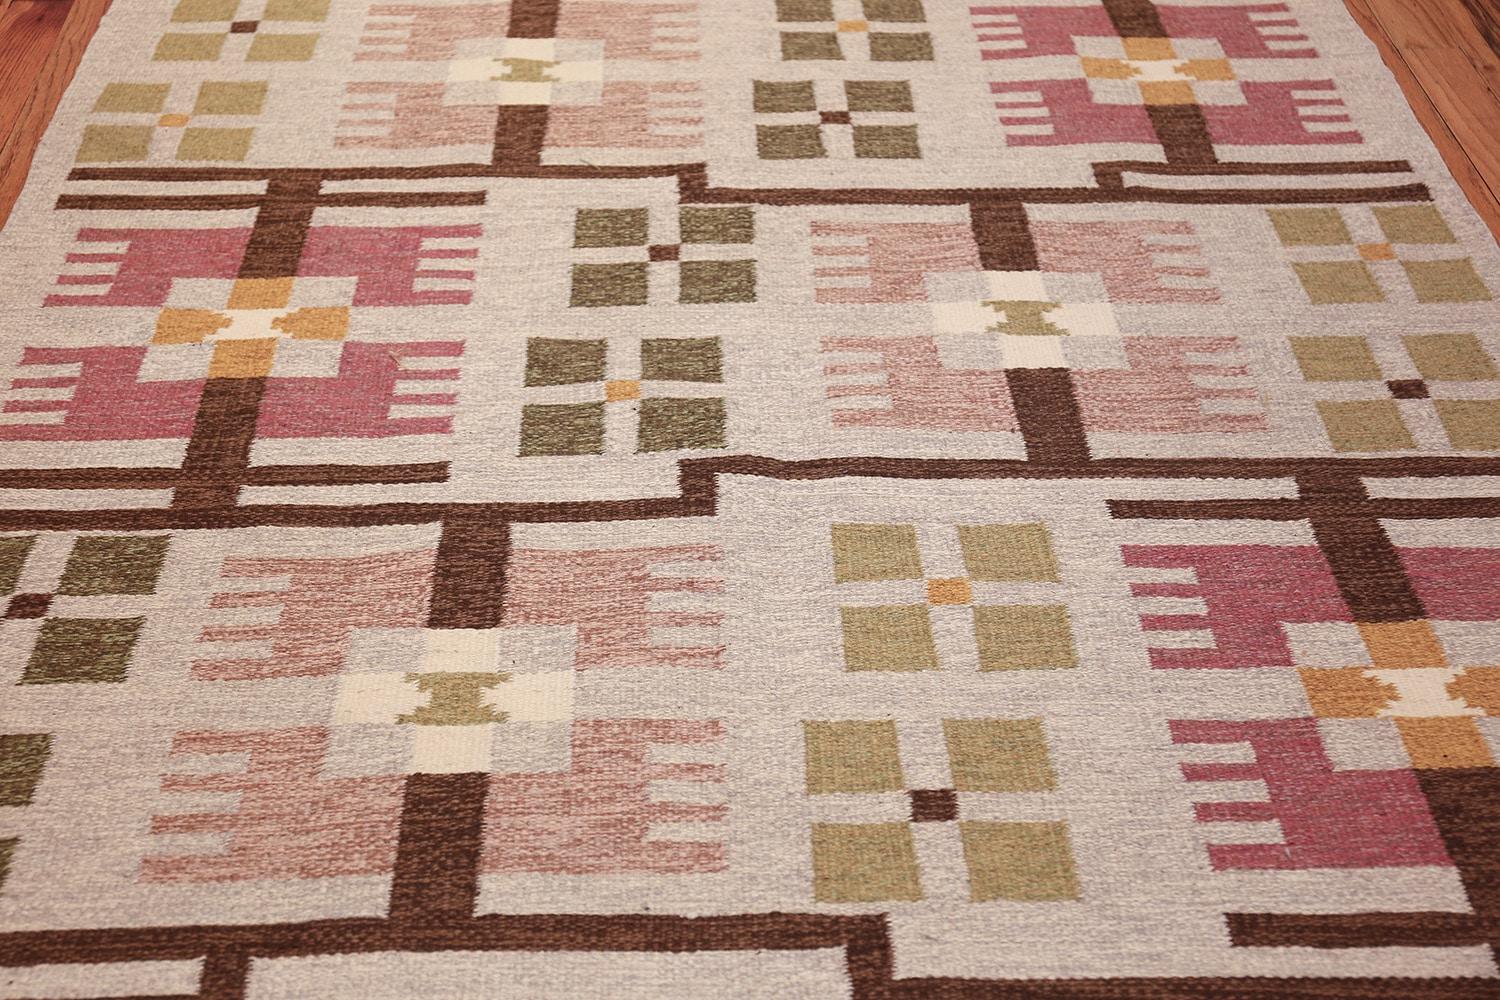 Vintage Geometric Scandinavian Flat Woven Kilim Rug by Ulla Brandt, Country of Origin / Rug Type: Scandinavia Rug, Circa date: Mid – 20th Century. Size: 5 ft 5 in x 8 ft 3 in (1.65 m x 2.51 m)

